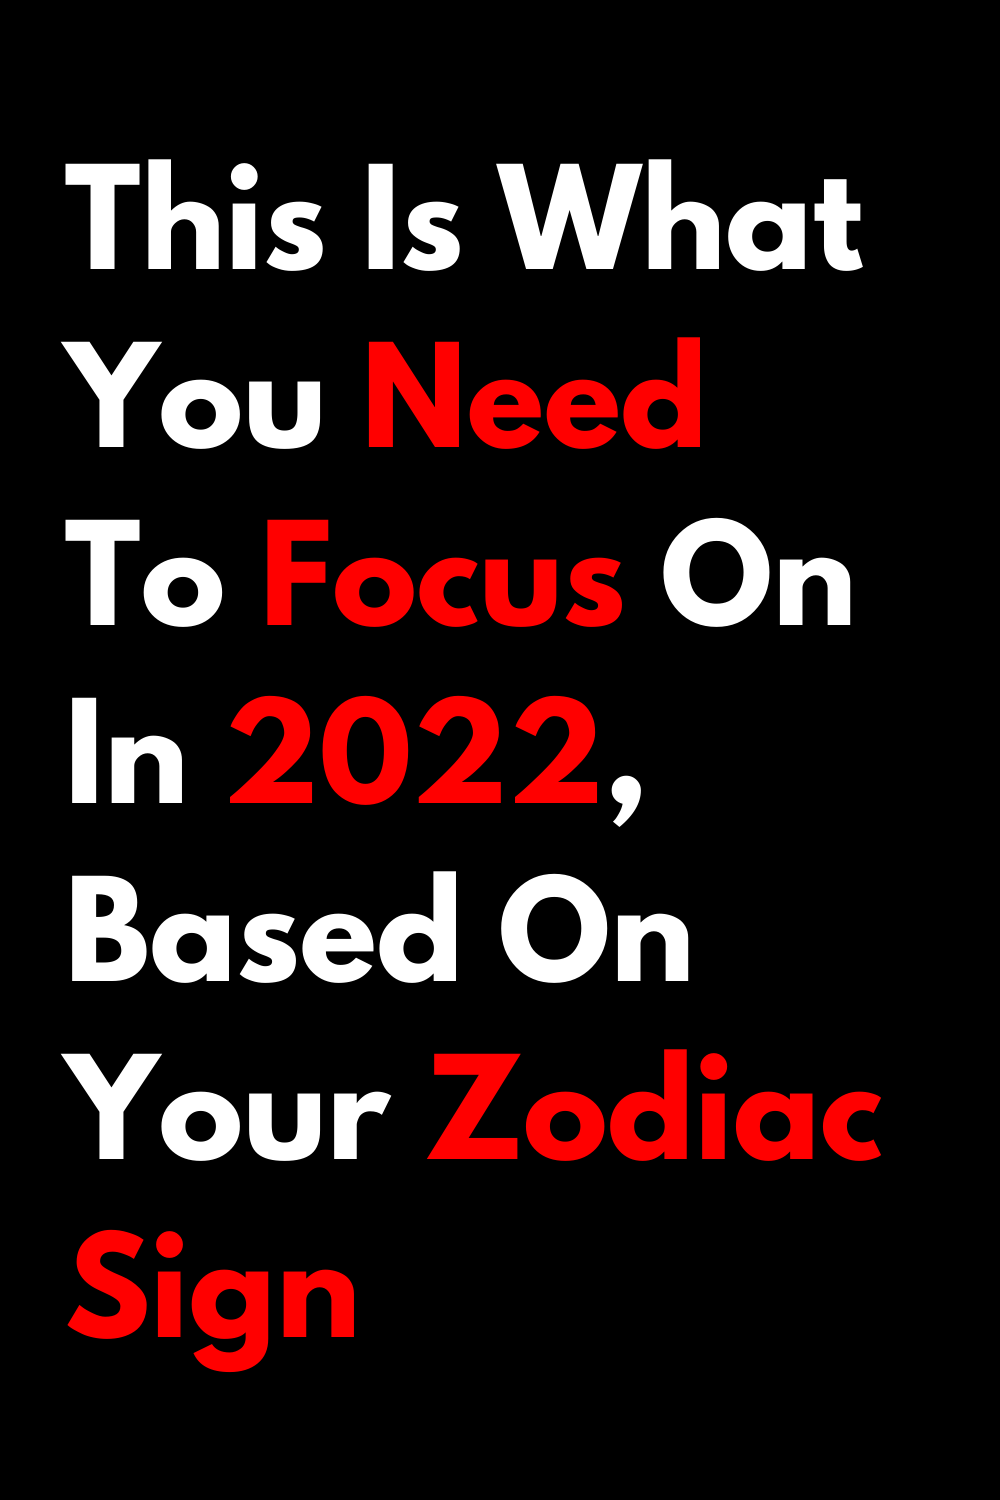 ZODIAC BLOGS This Is What You Need To Focus On In 2022, Based On Your Zodiac Sign